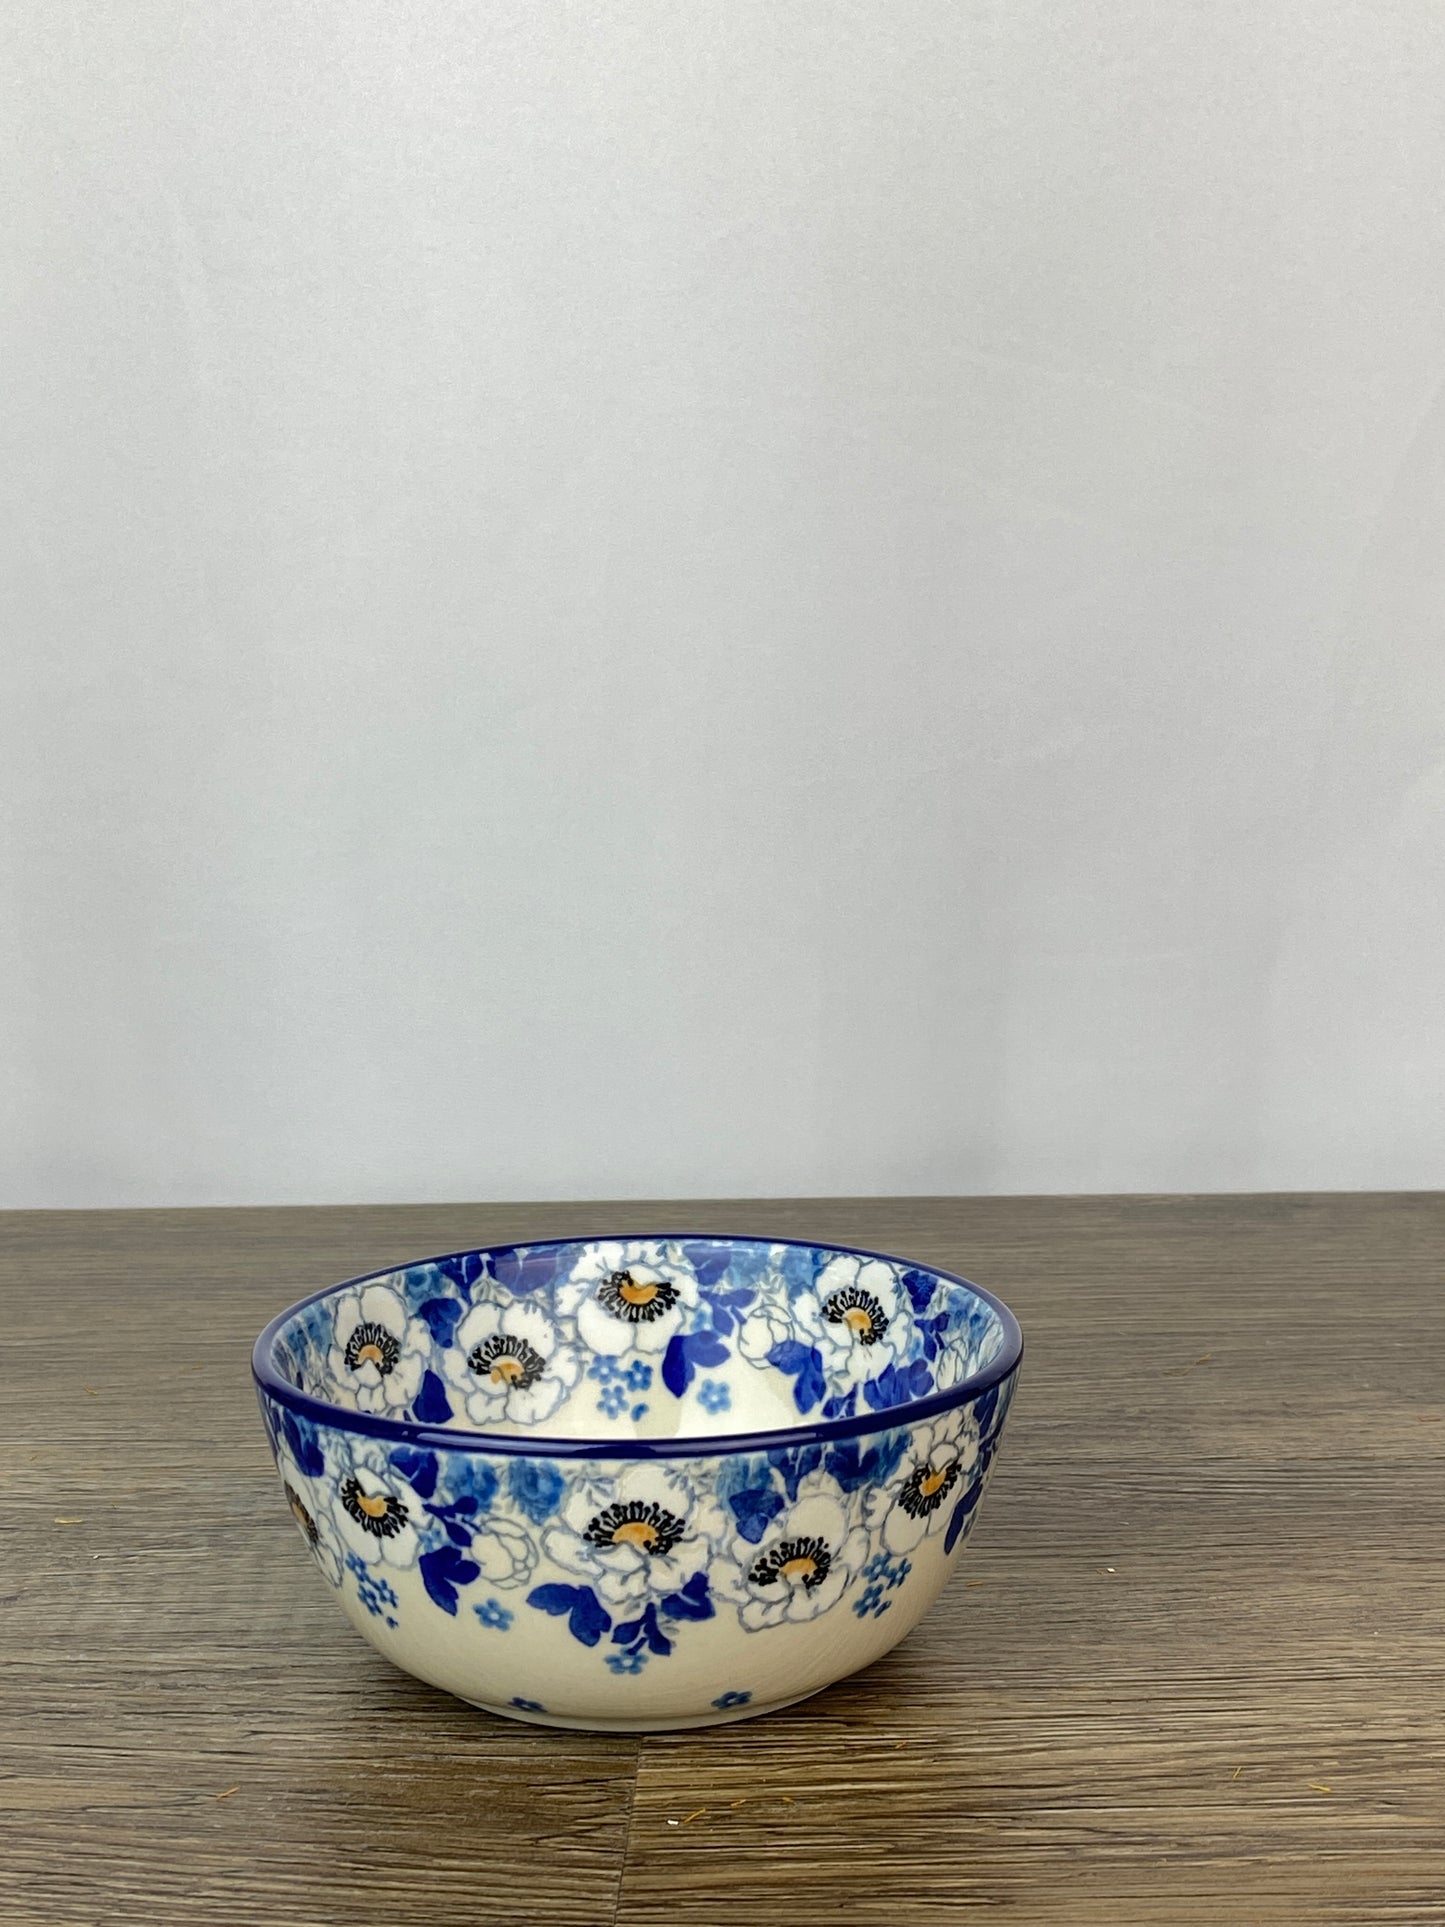 Small Cereal / Dessert Bowl - Shape 17 - Pattern 2222